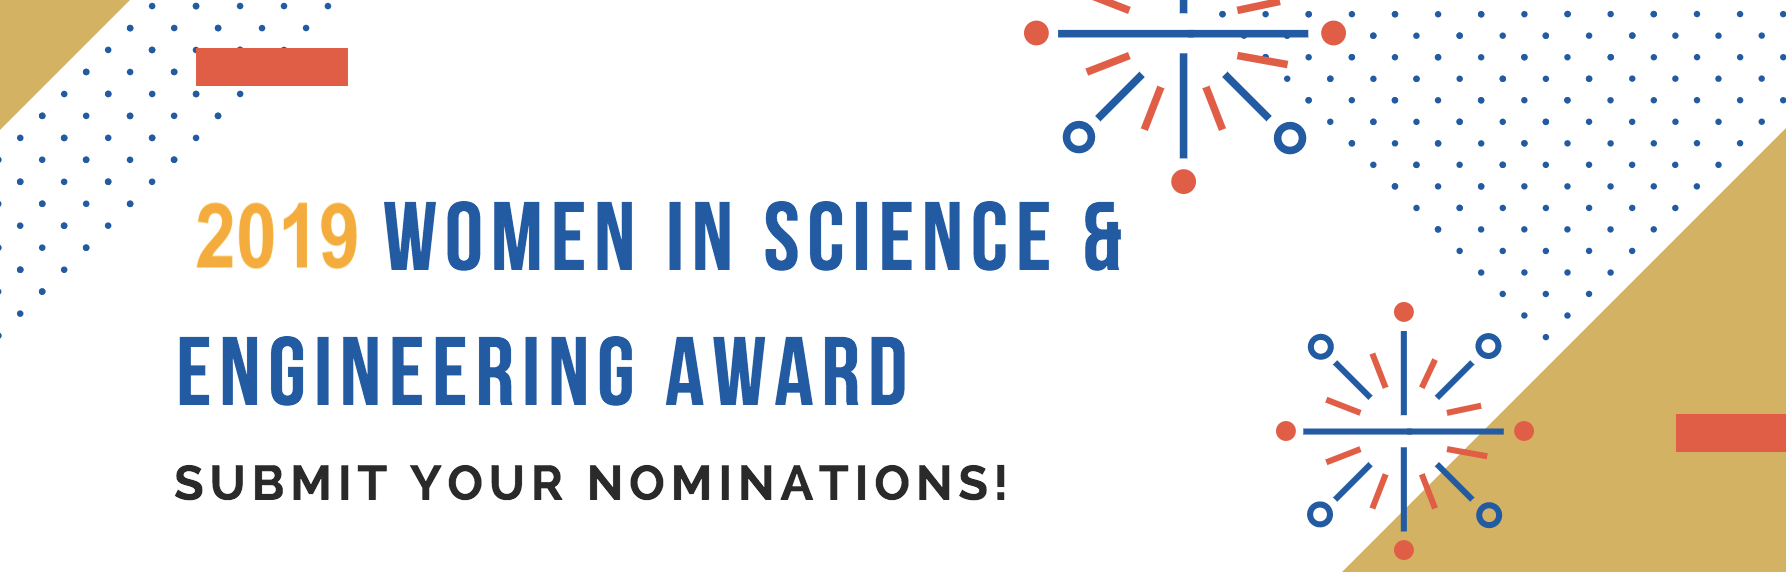 Submit your nominations! 2019 Women in Science and Engineering Award